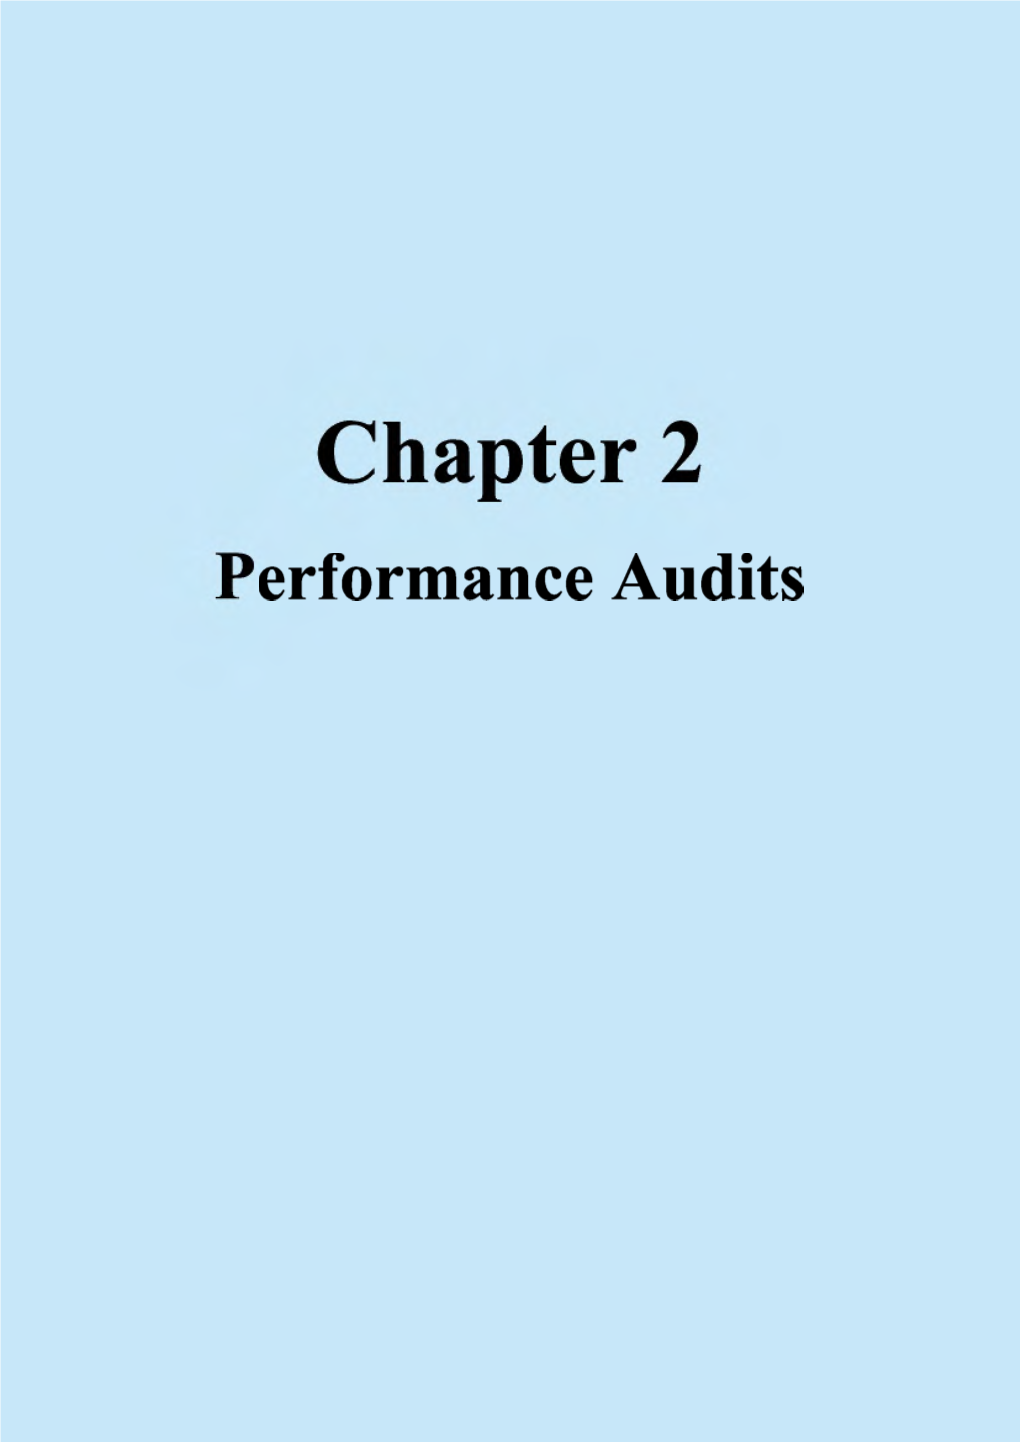 Chapter 2: Performance Audits